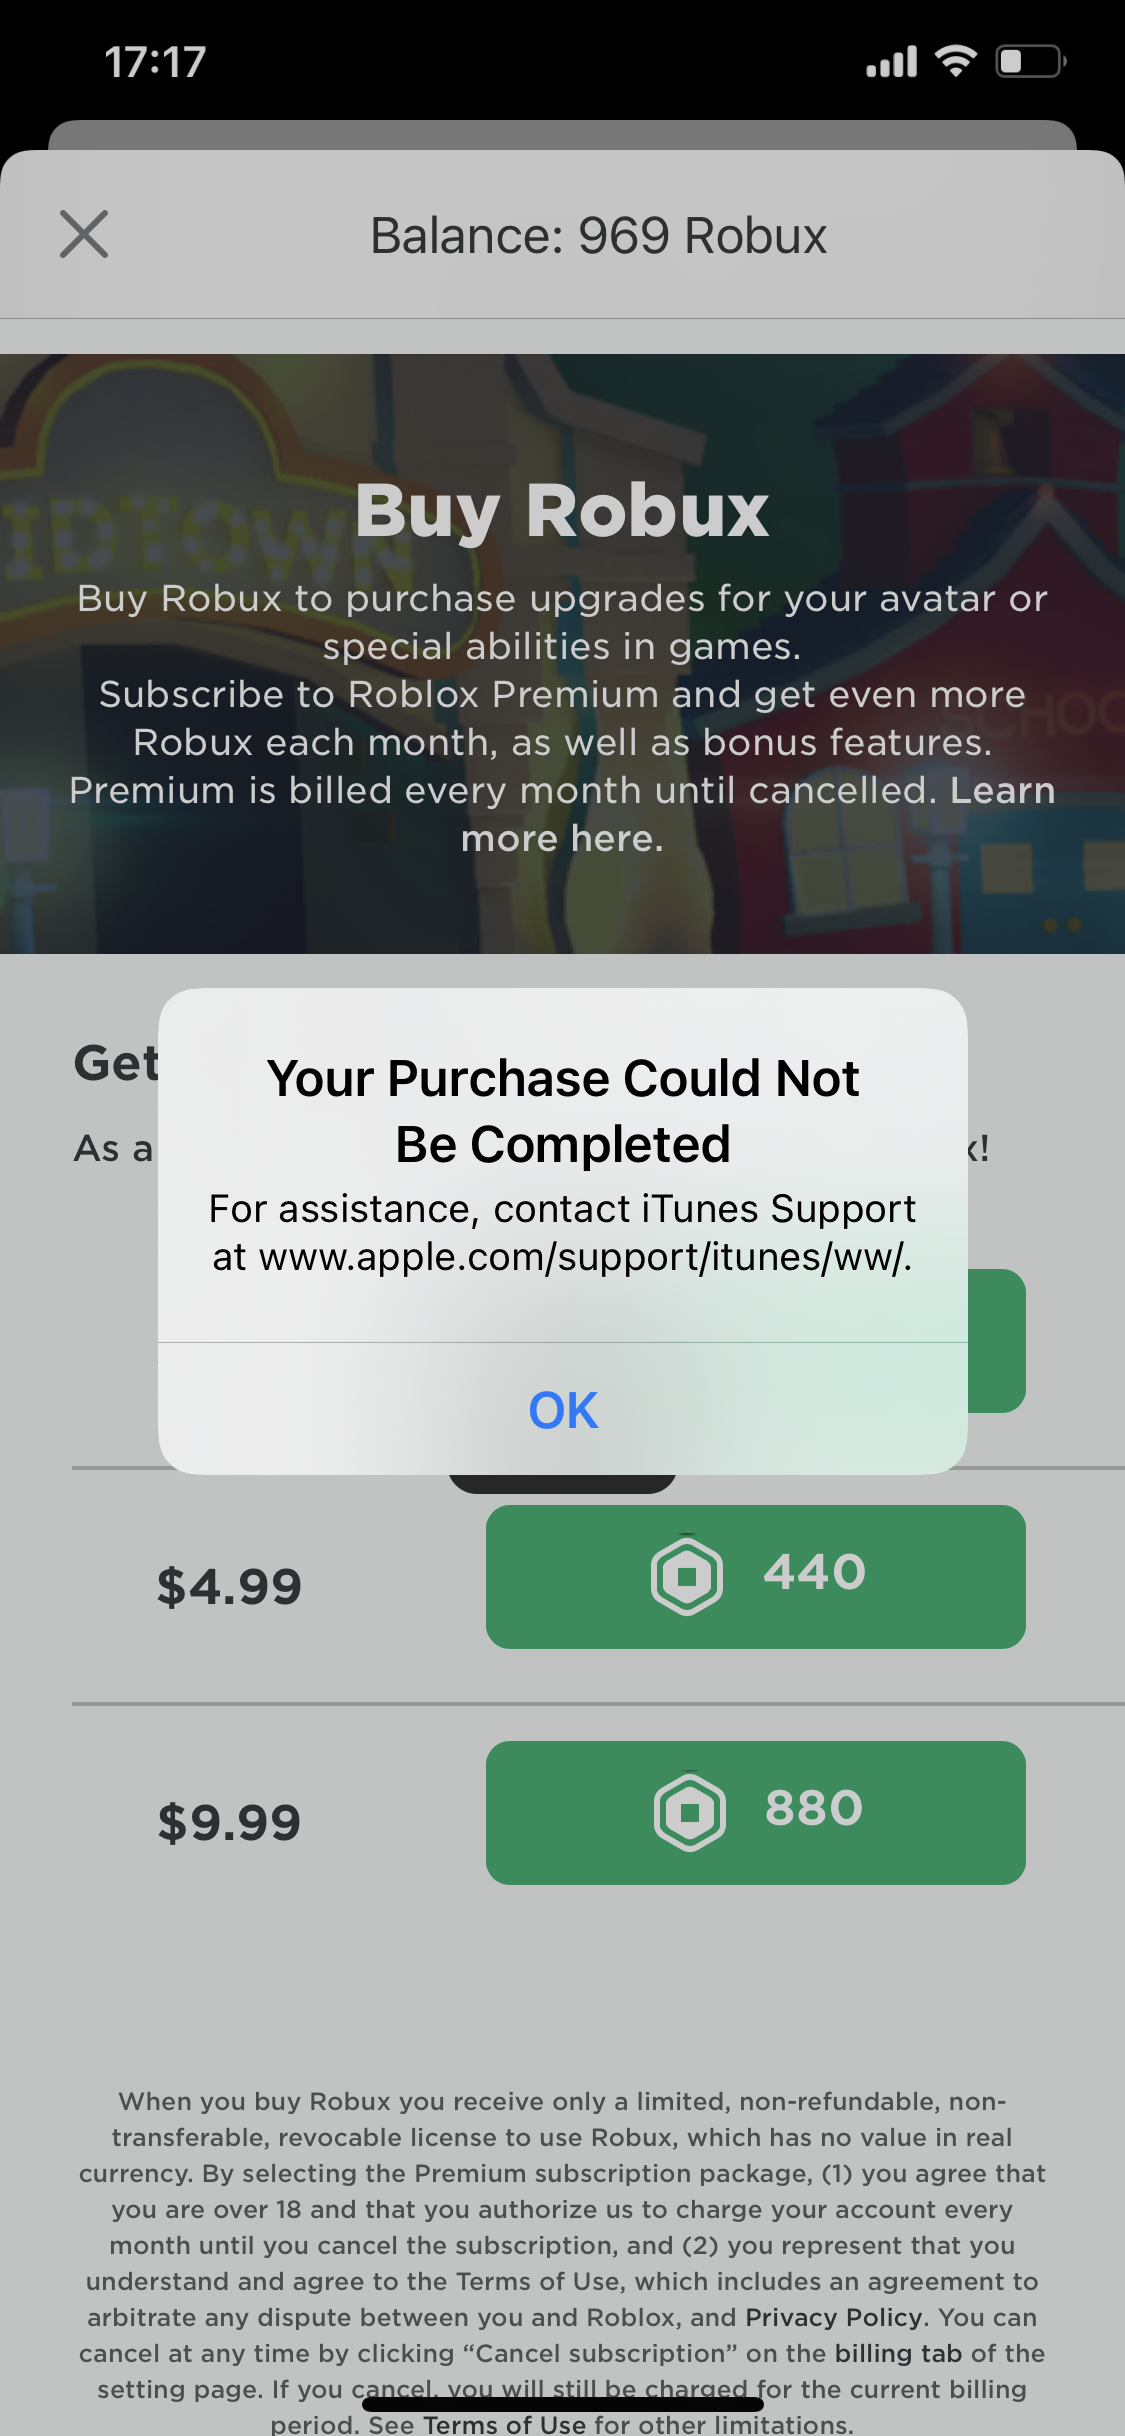 How To Buy Robux With Apple Gift Card On Phone - how to buy robux with apple gift card 2020